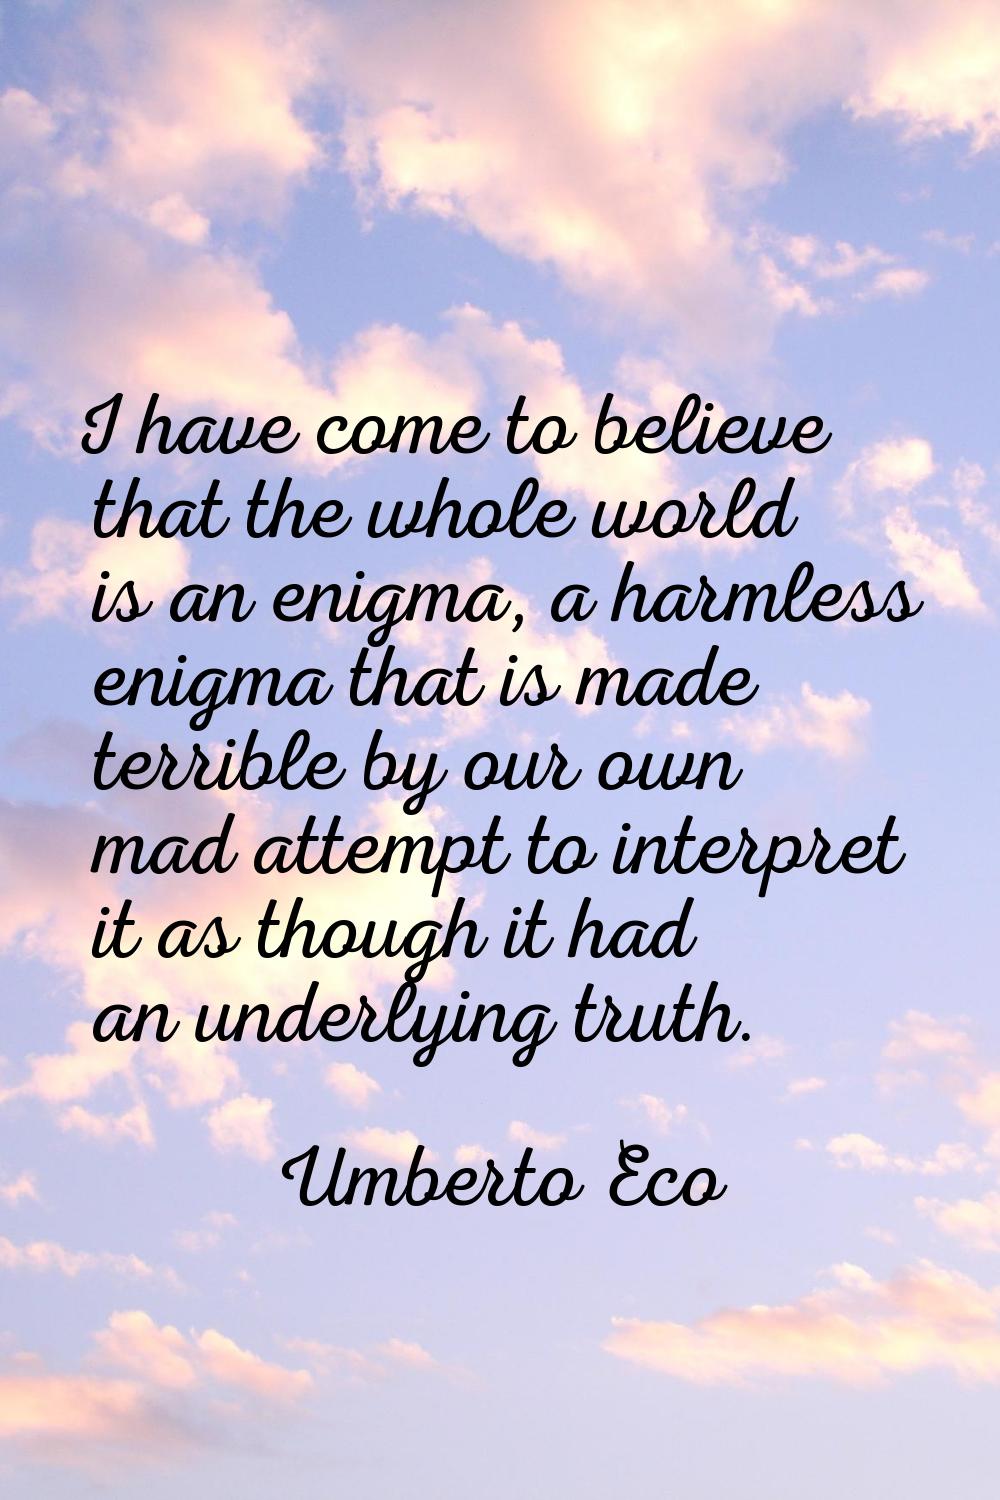 I have come to believe that the whole world is an enigma, a harmless enigma that is made terrible b